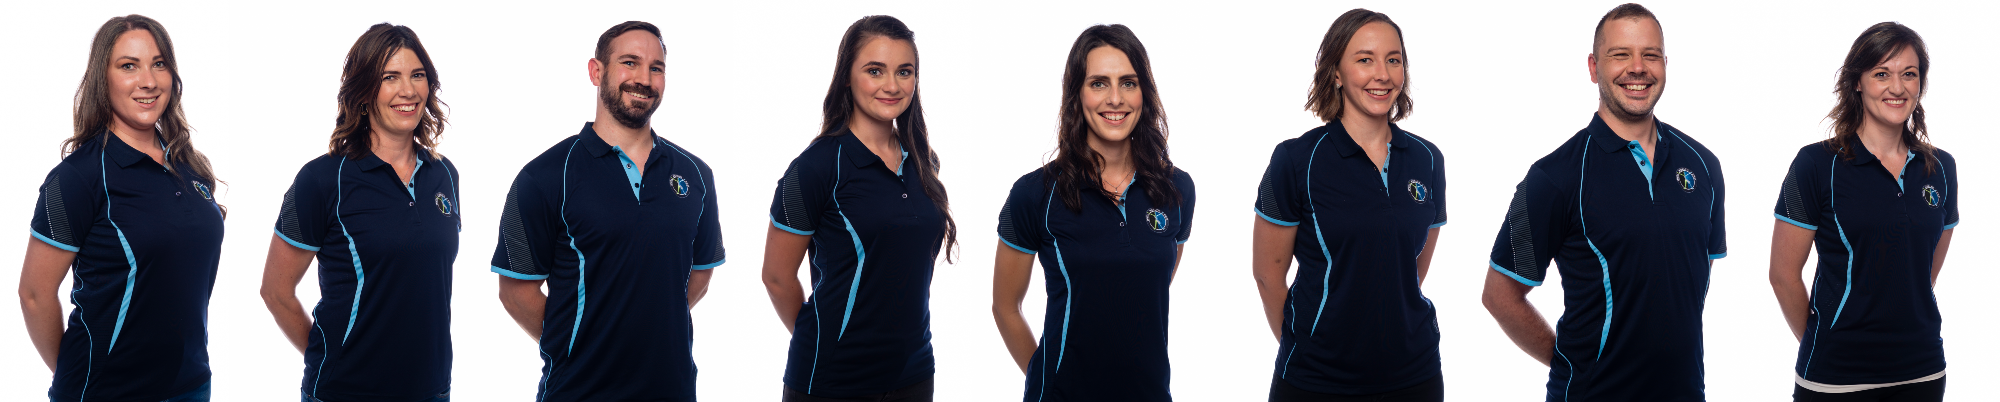 Physiotherapists at Well Health Pro